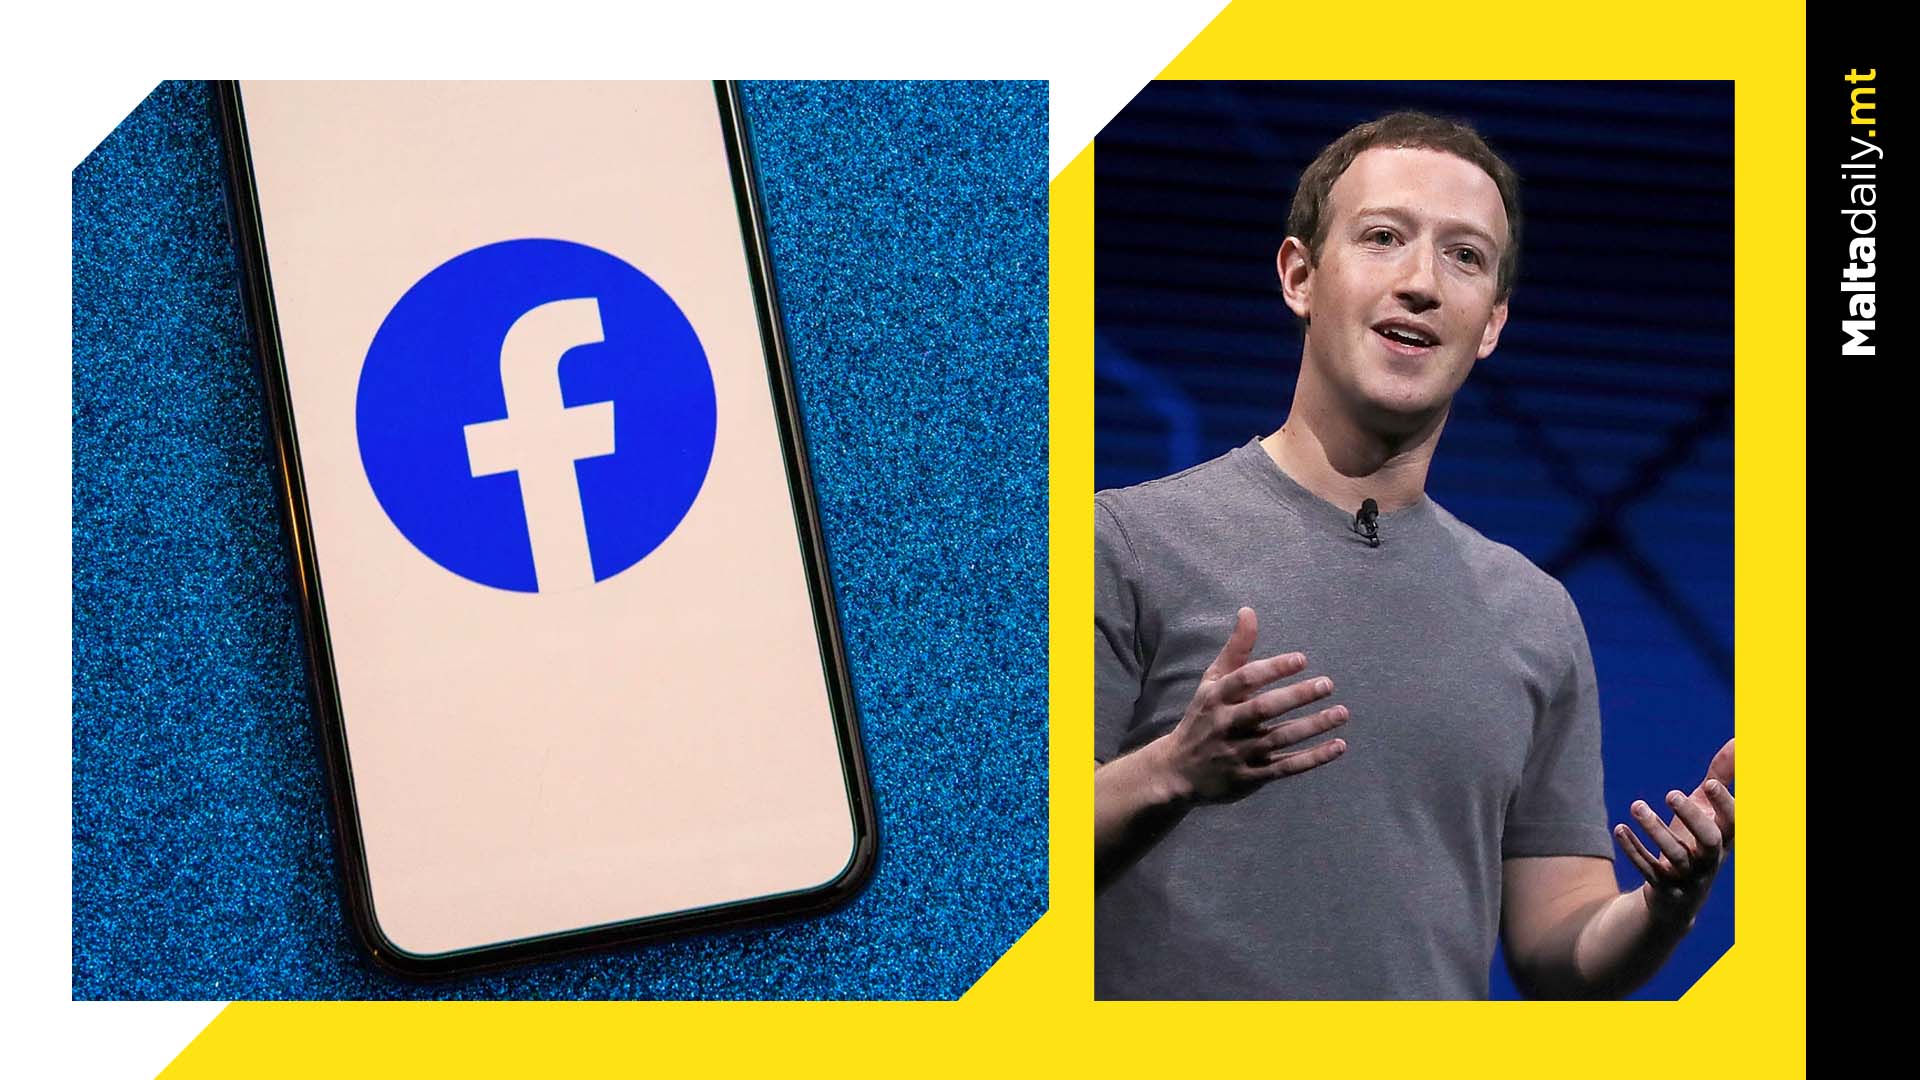 Facebook officially registers two billion daily active users